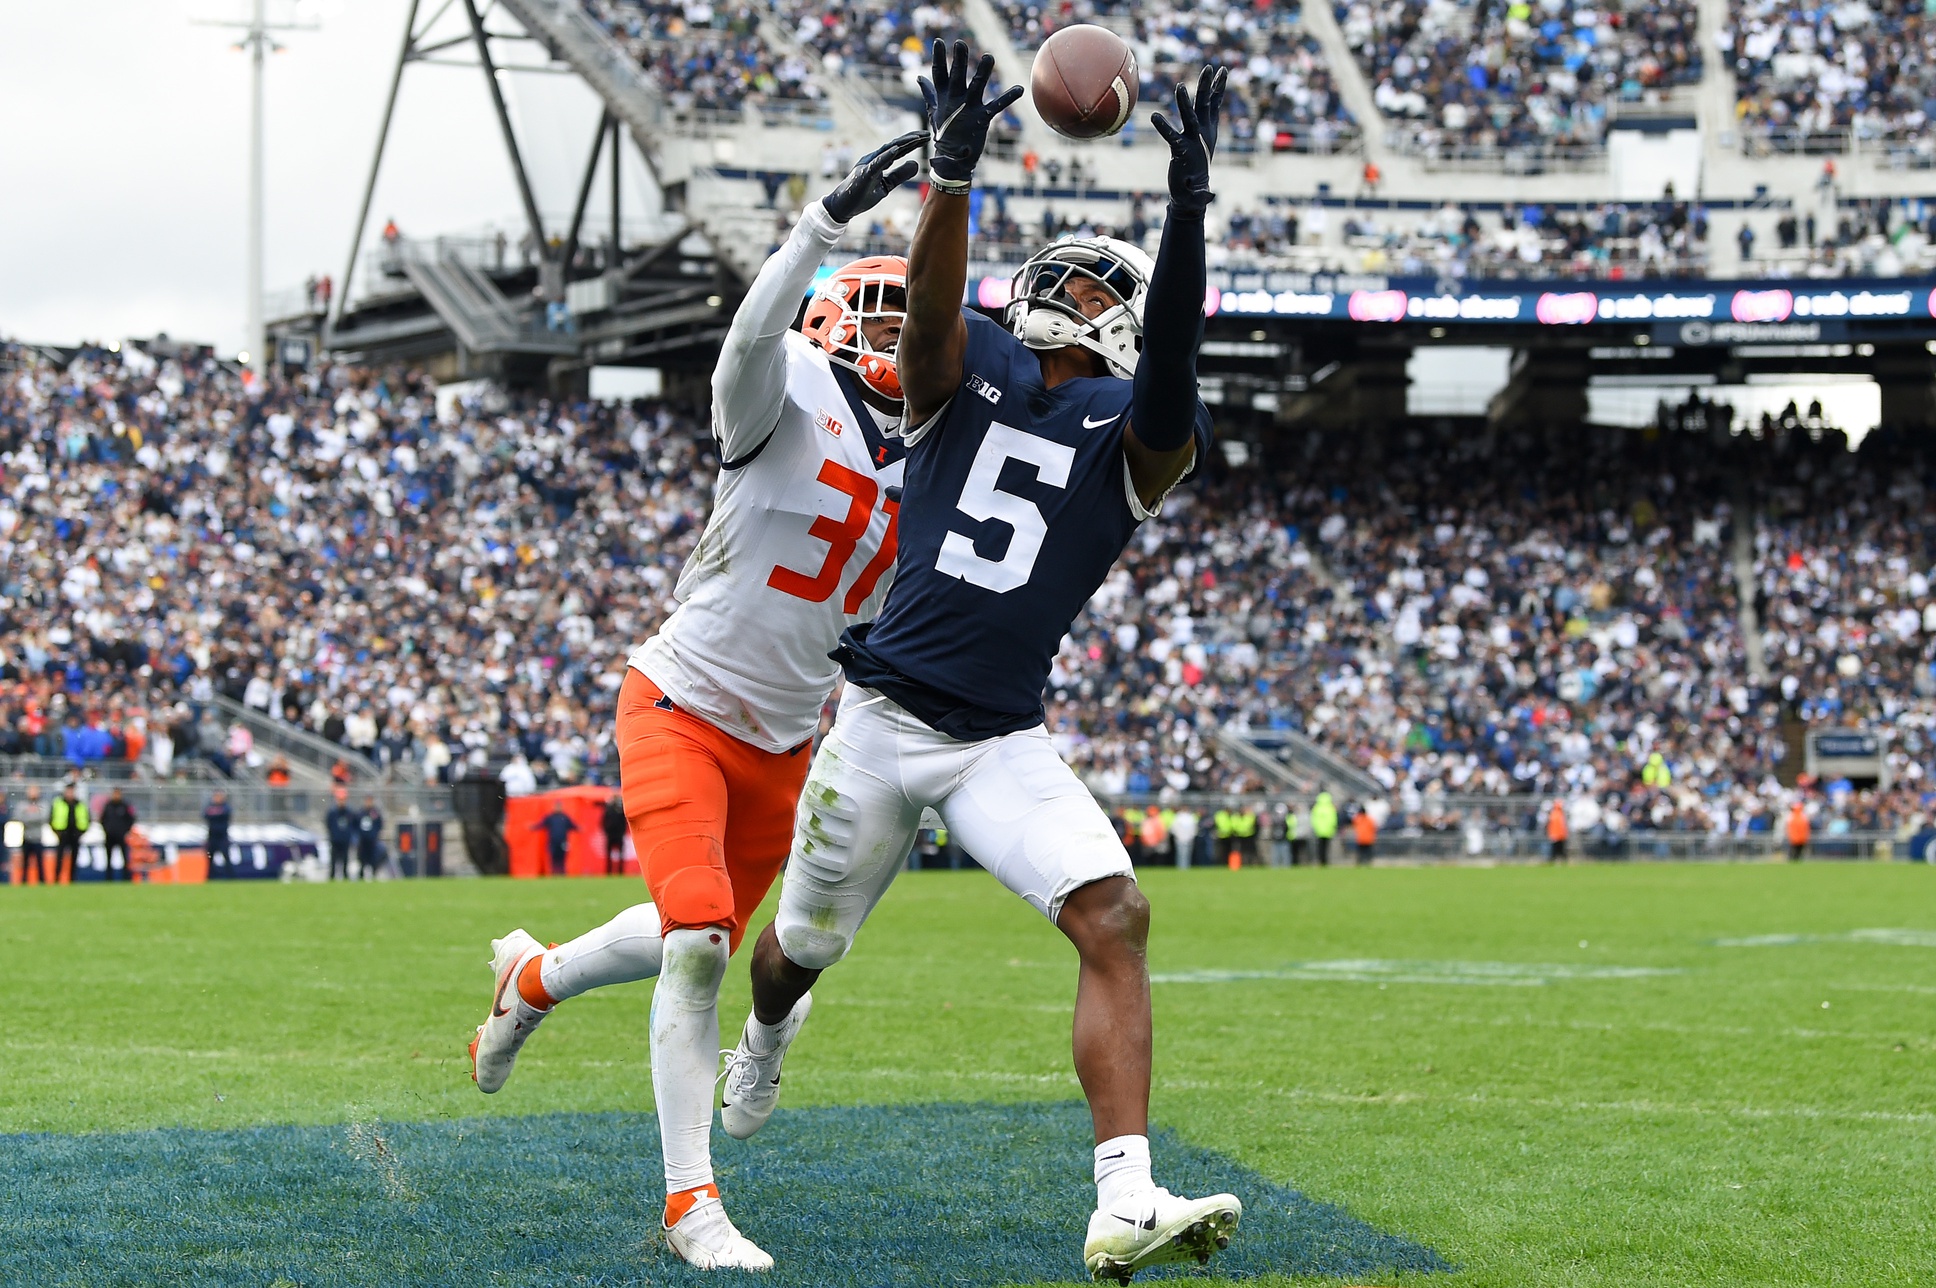 Illinois CB Devon Witherspoon defends against Penn State's Jahan Dotson in 2021